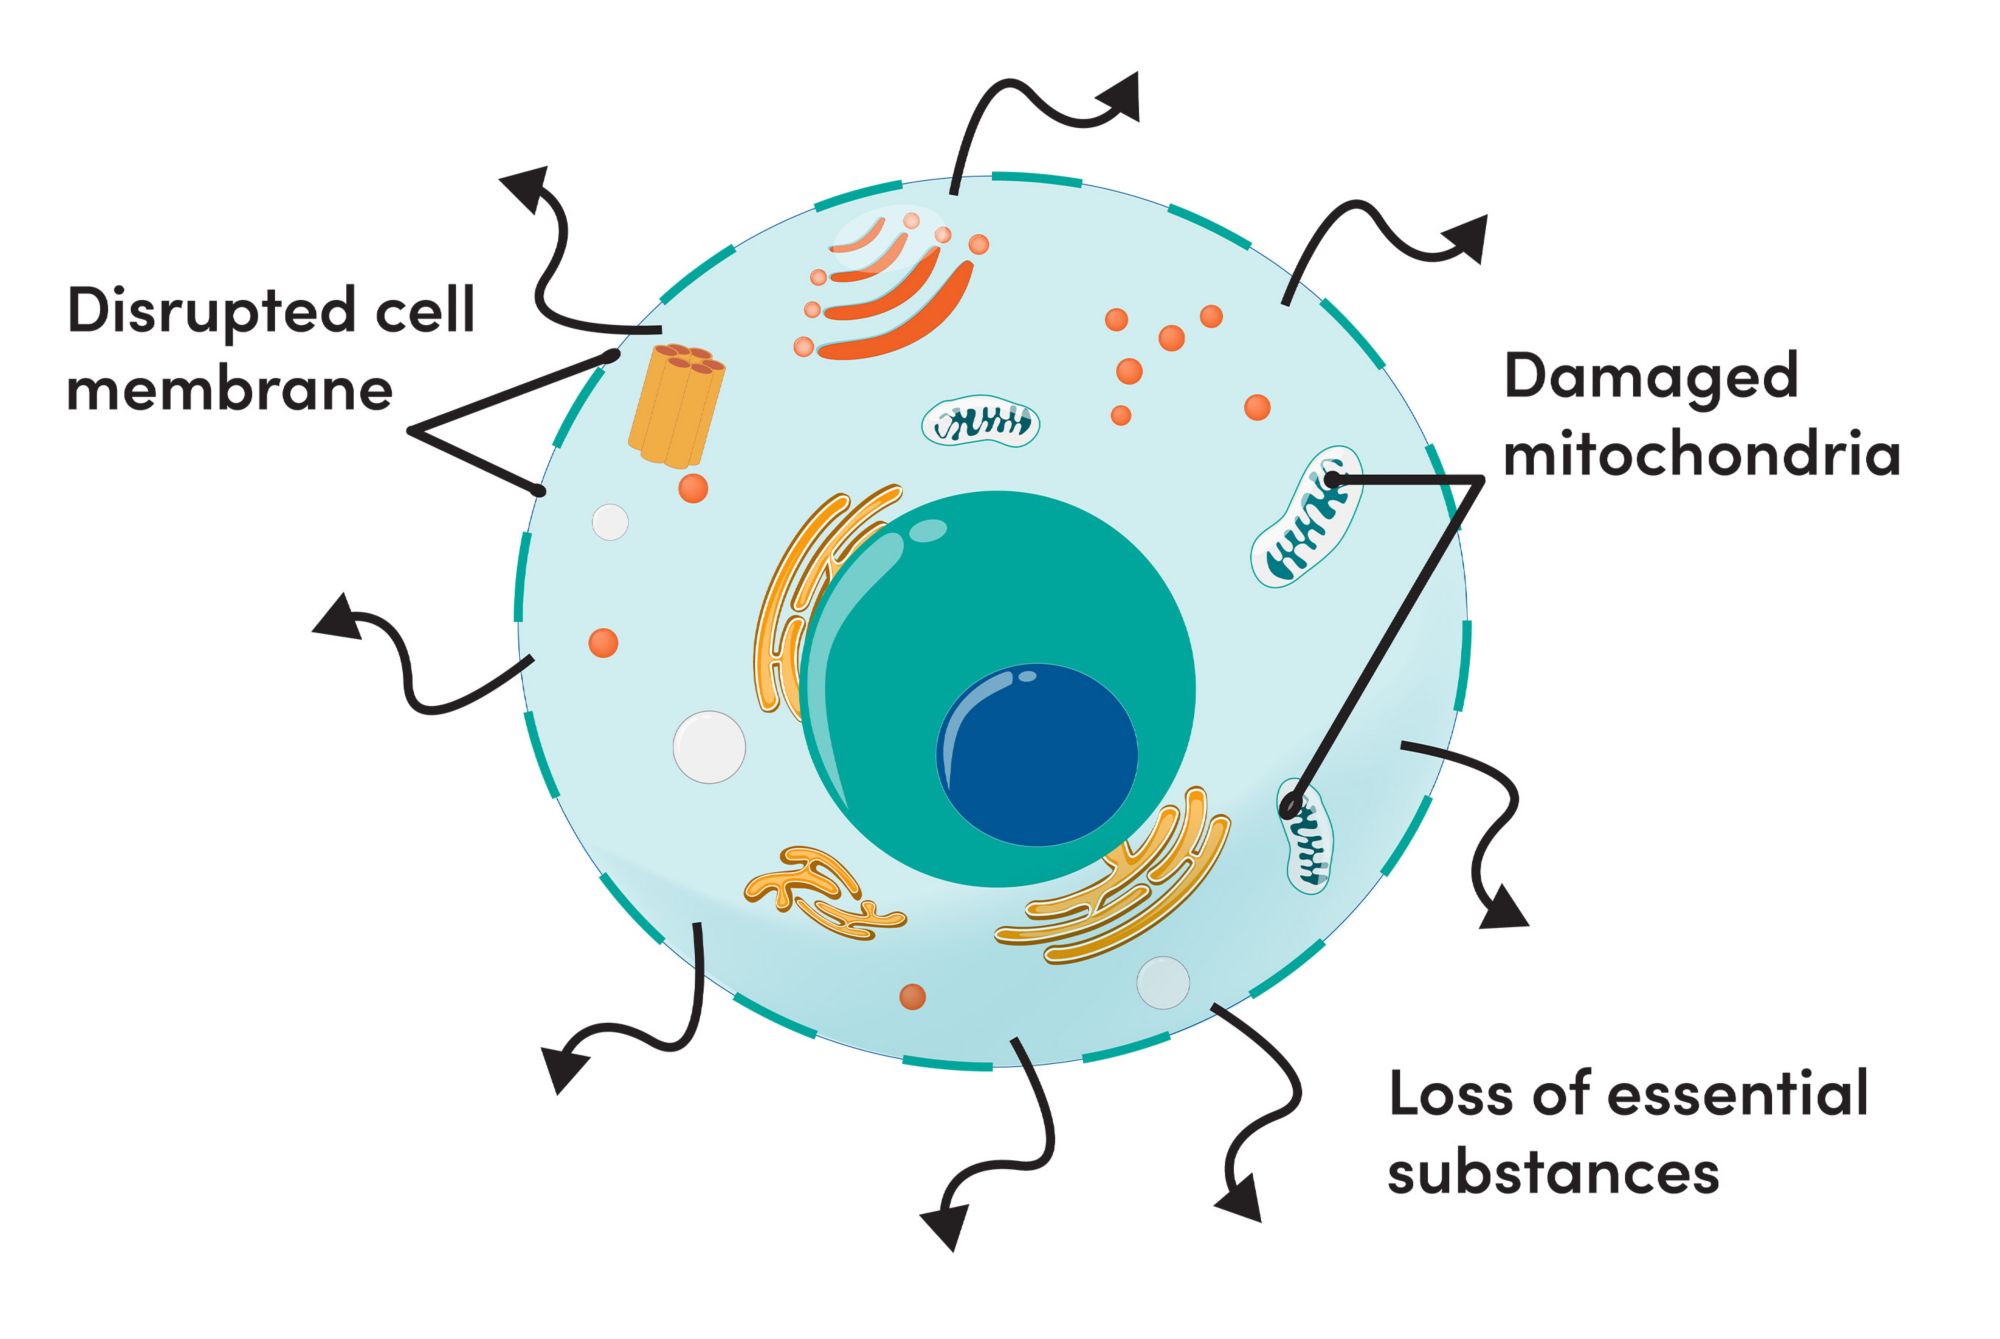 The diagram shows a disrupted cell membrane of a damaged mitochondria, resulting in the loss of essential substances 